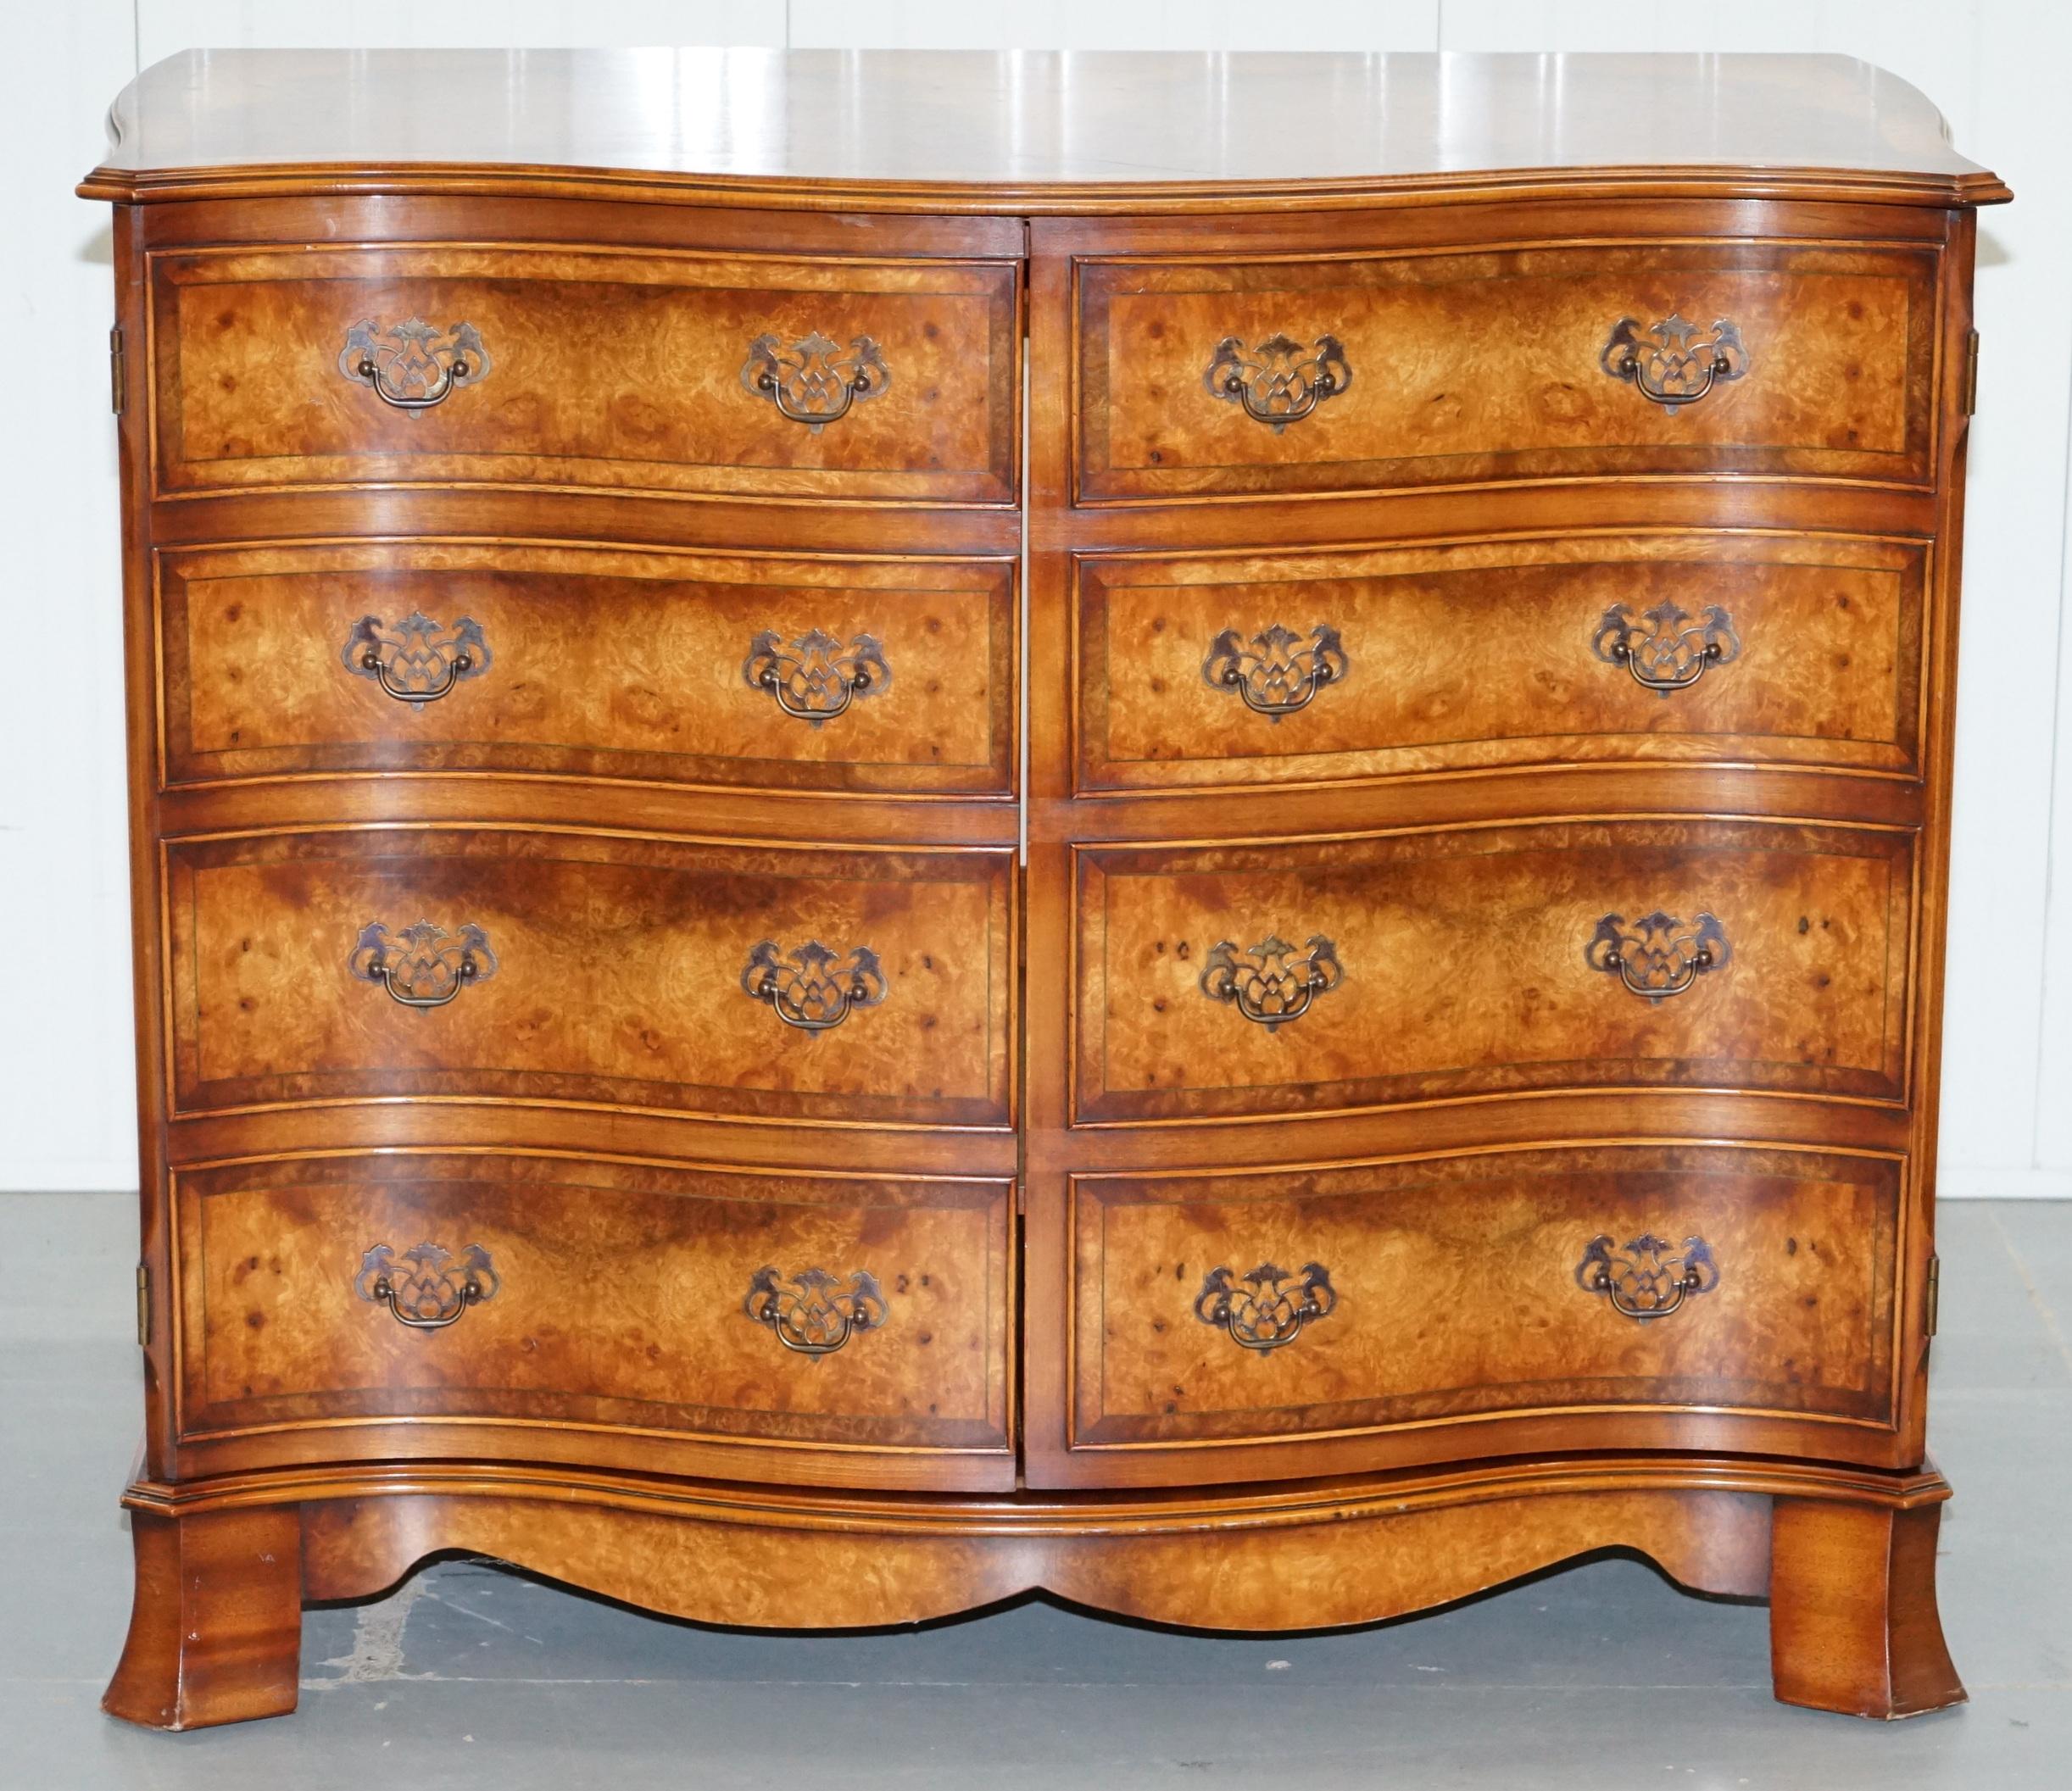 We are delighted to offer for sale this stunning large luxury burr walnut media cabinet

A very rare and premium piece of furniture, handmade in England from luxury cuts of Burr Walnut, the cabinet looks stunning from every angle and is a tour de